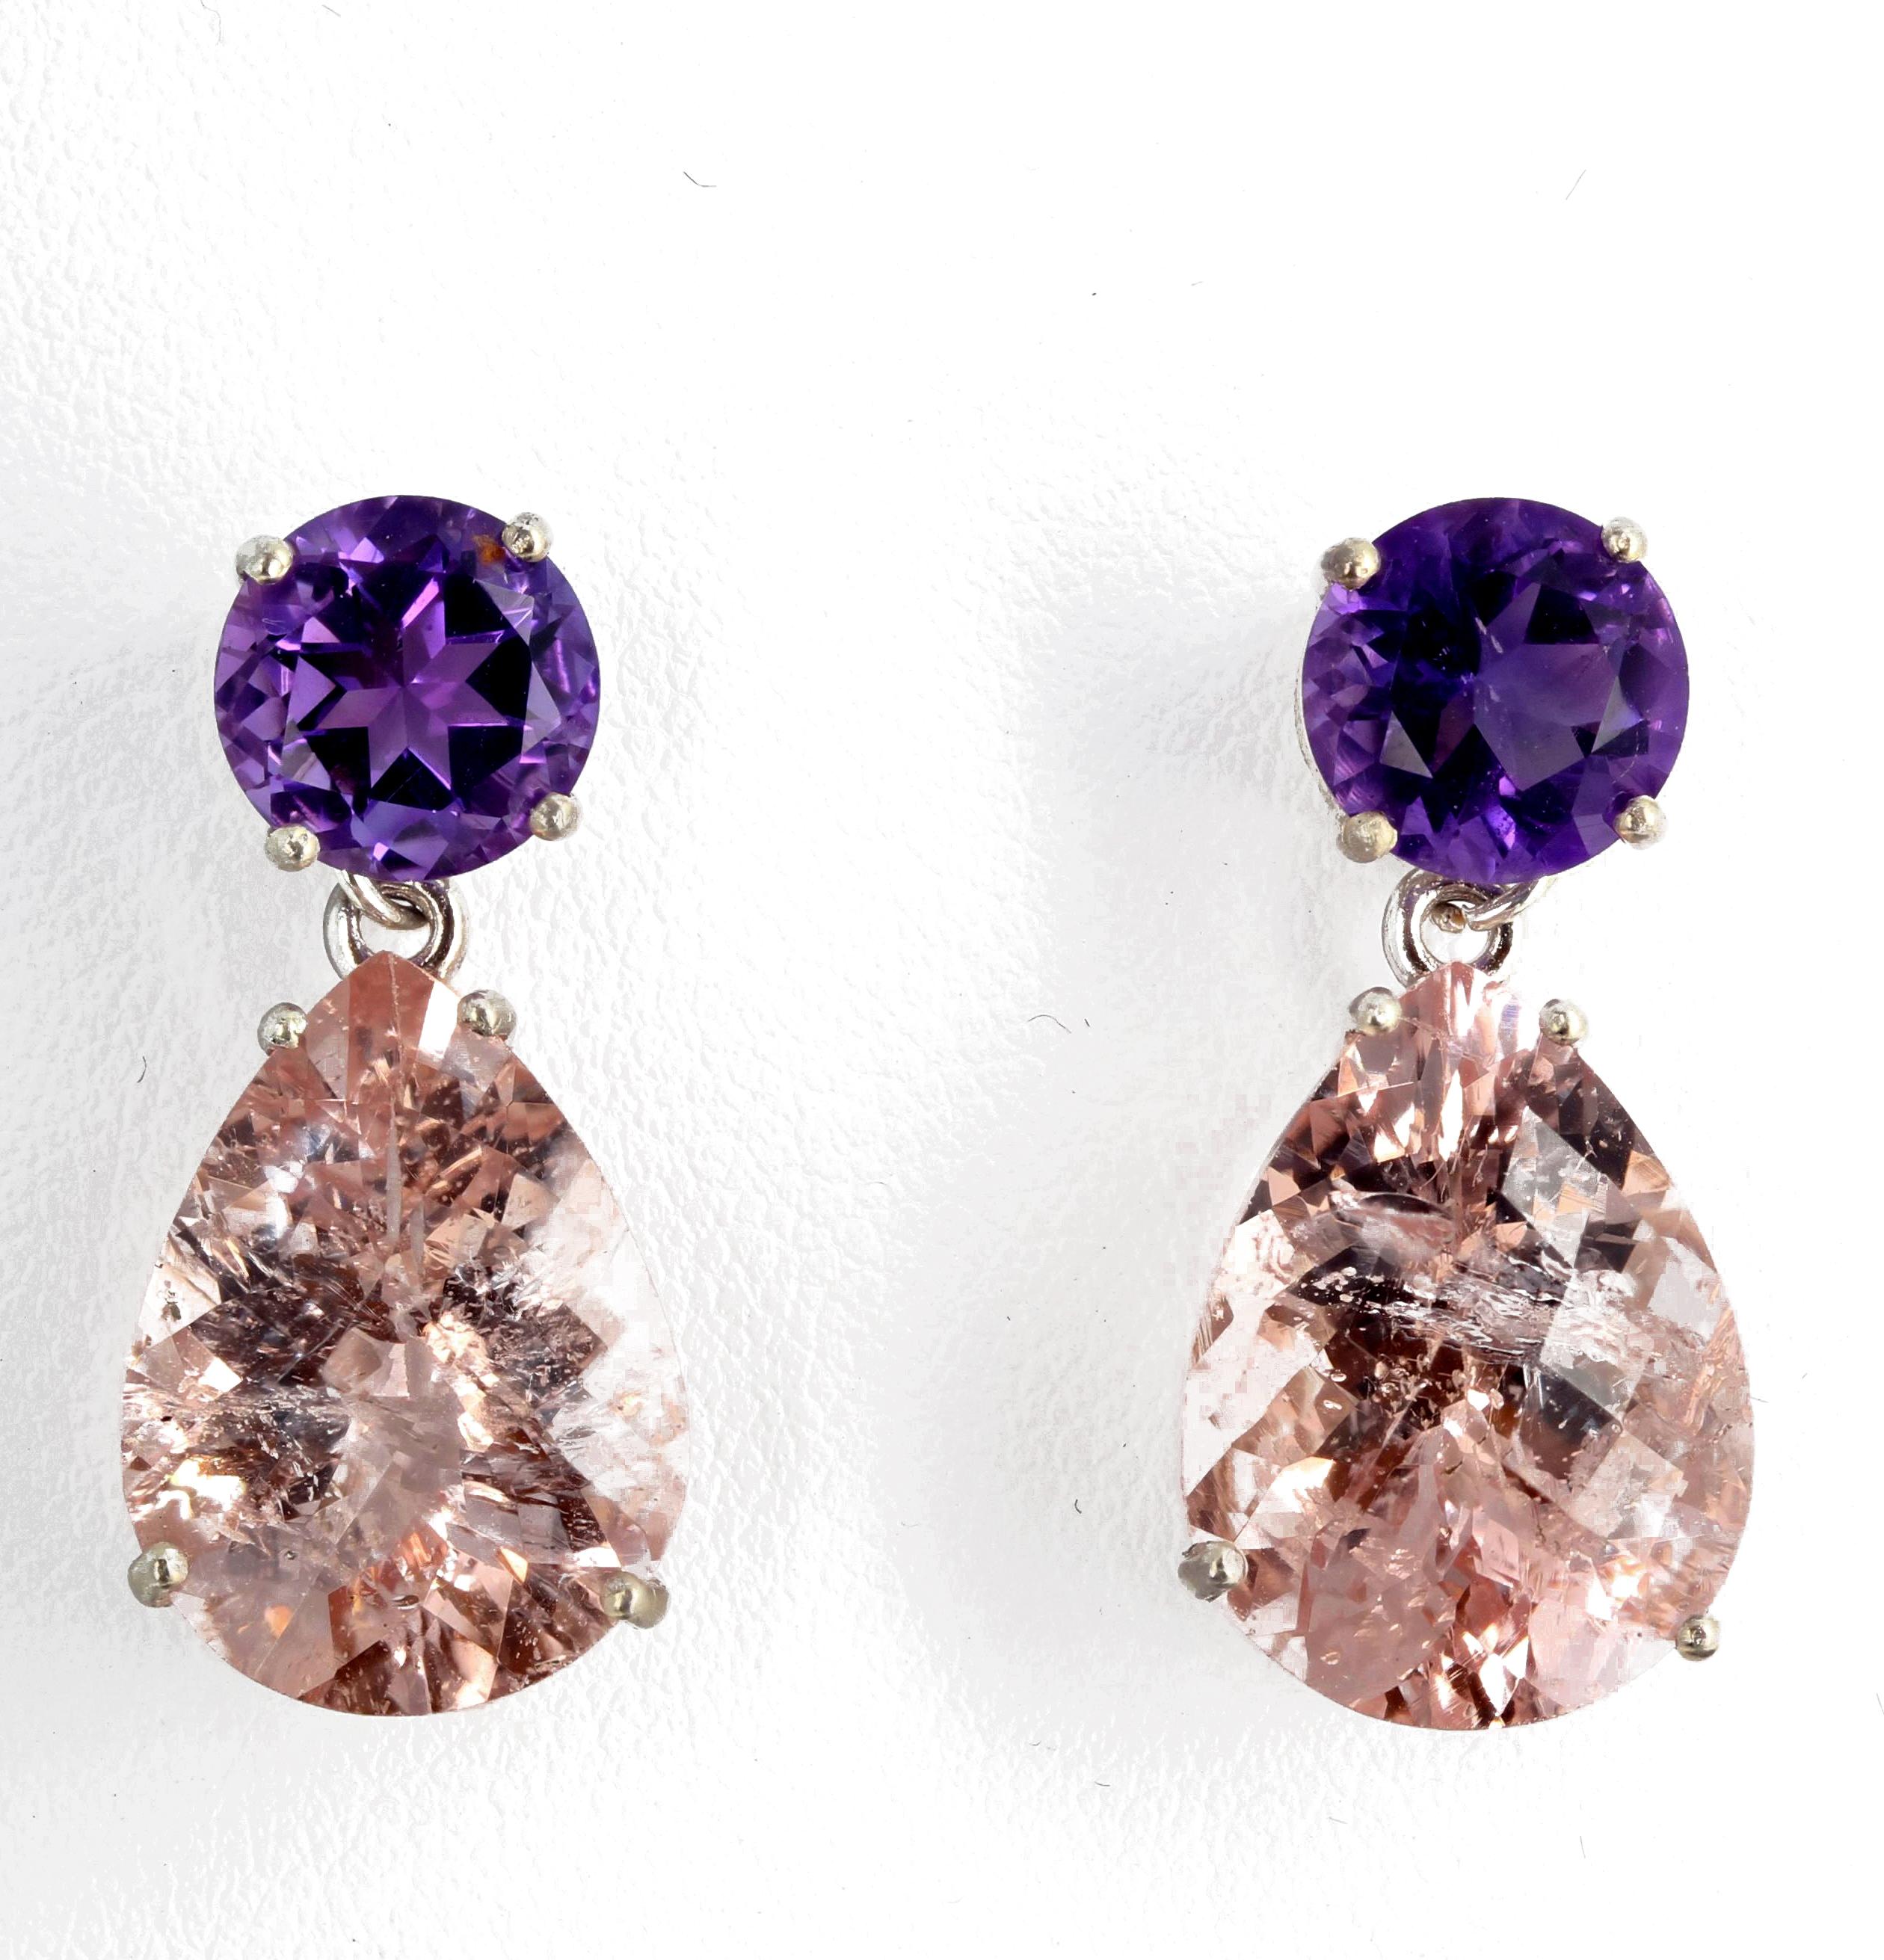 Unique3.62 Carats Amethysts & 15.16 Carats of Morganite Sterling Silver Earrings 1